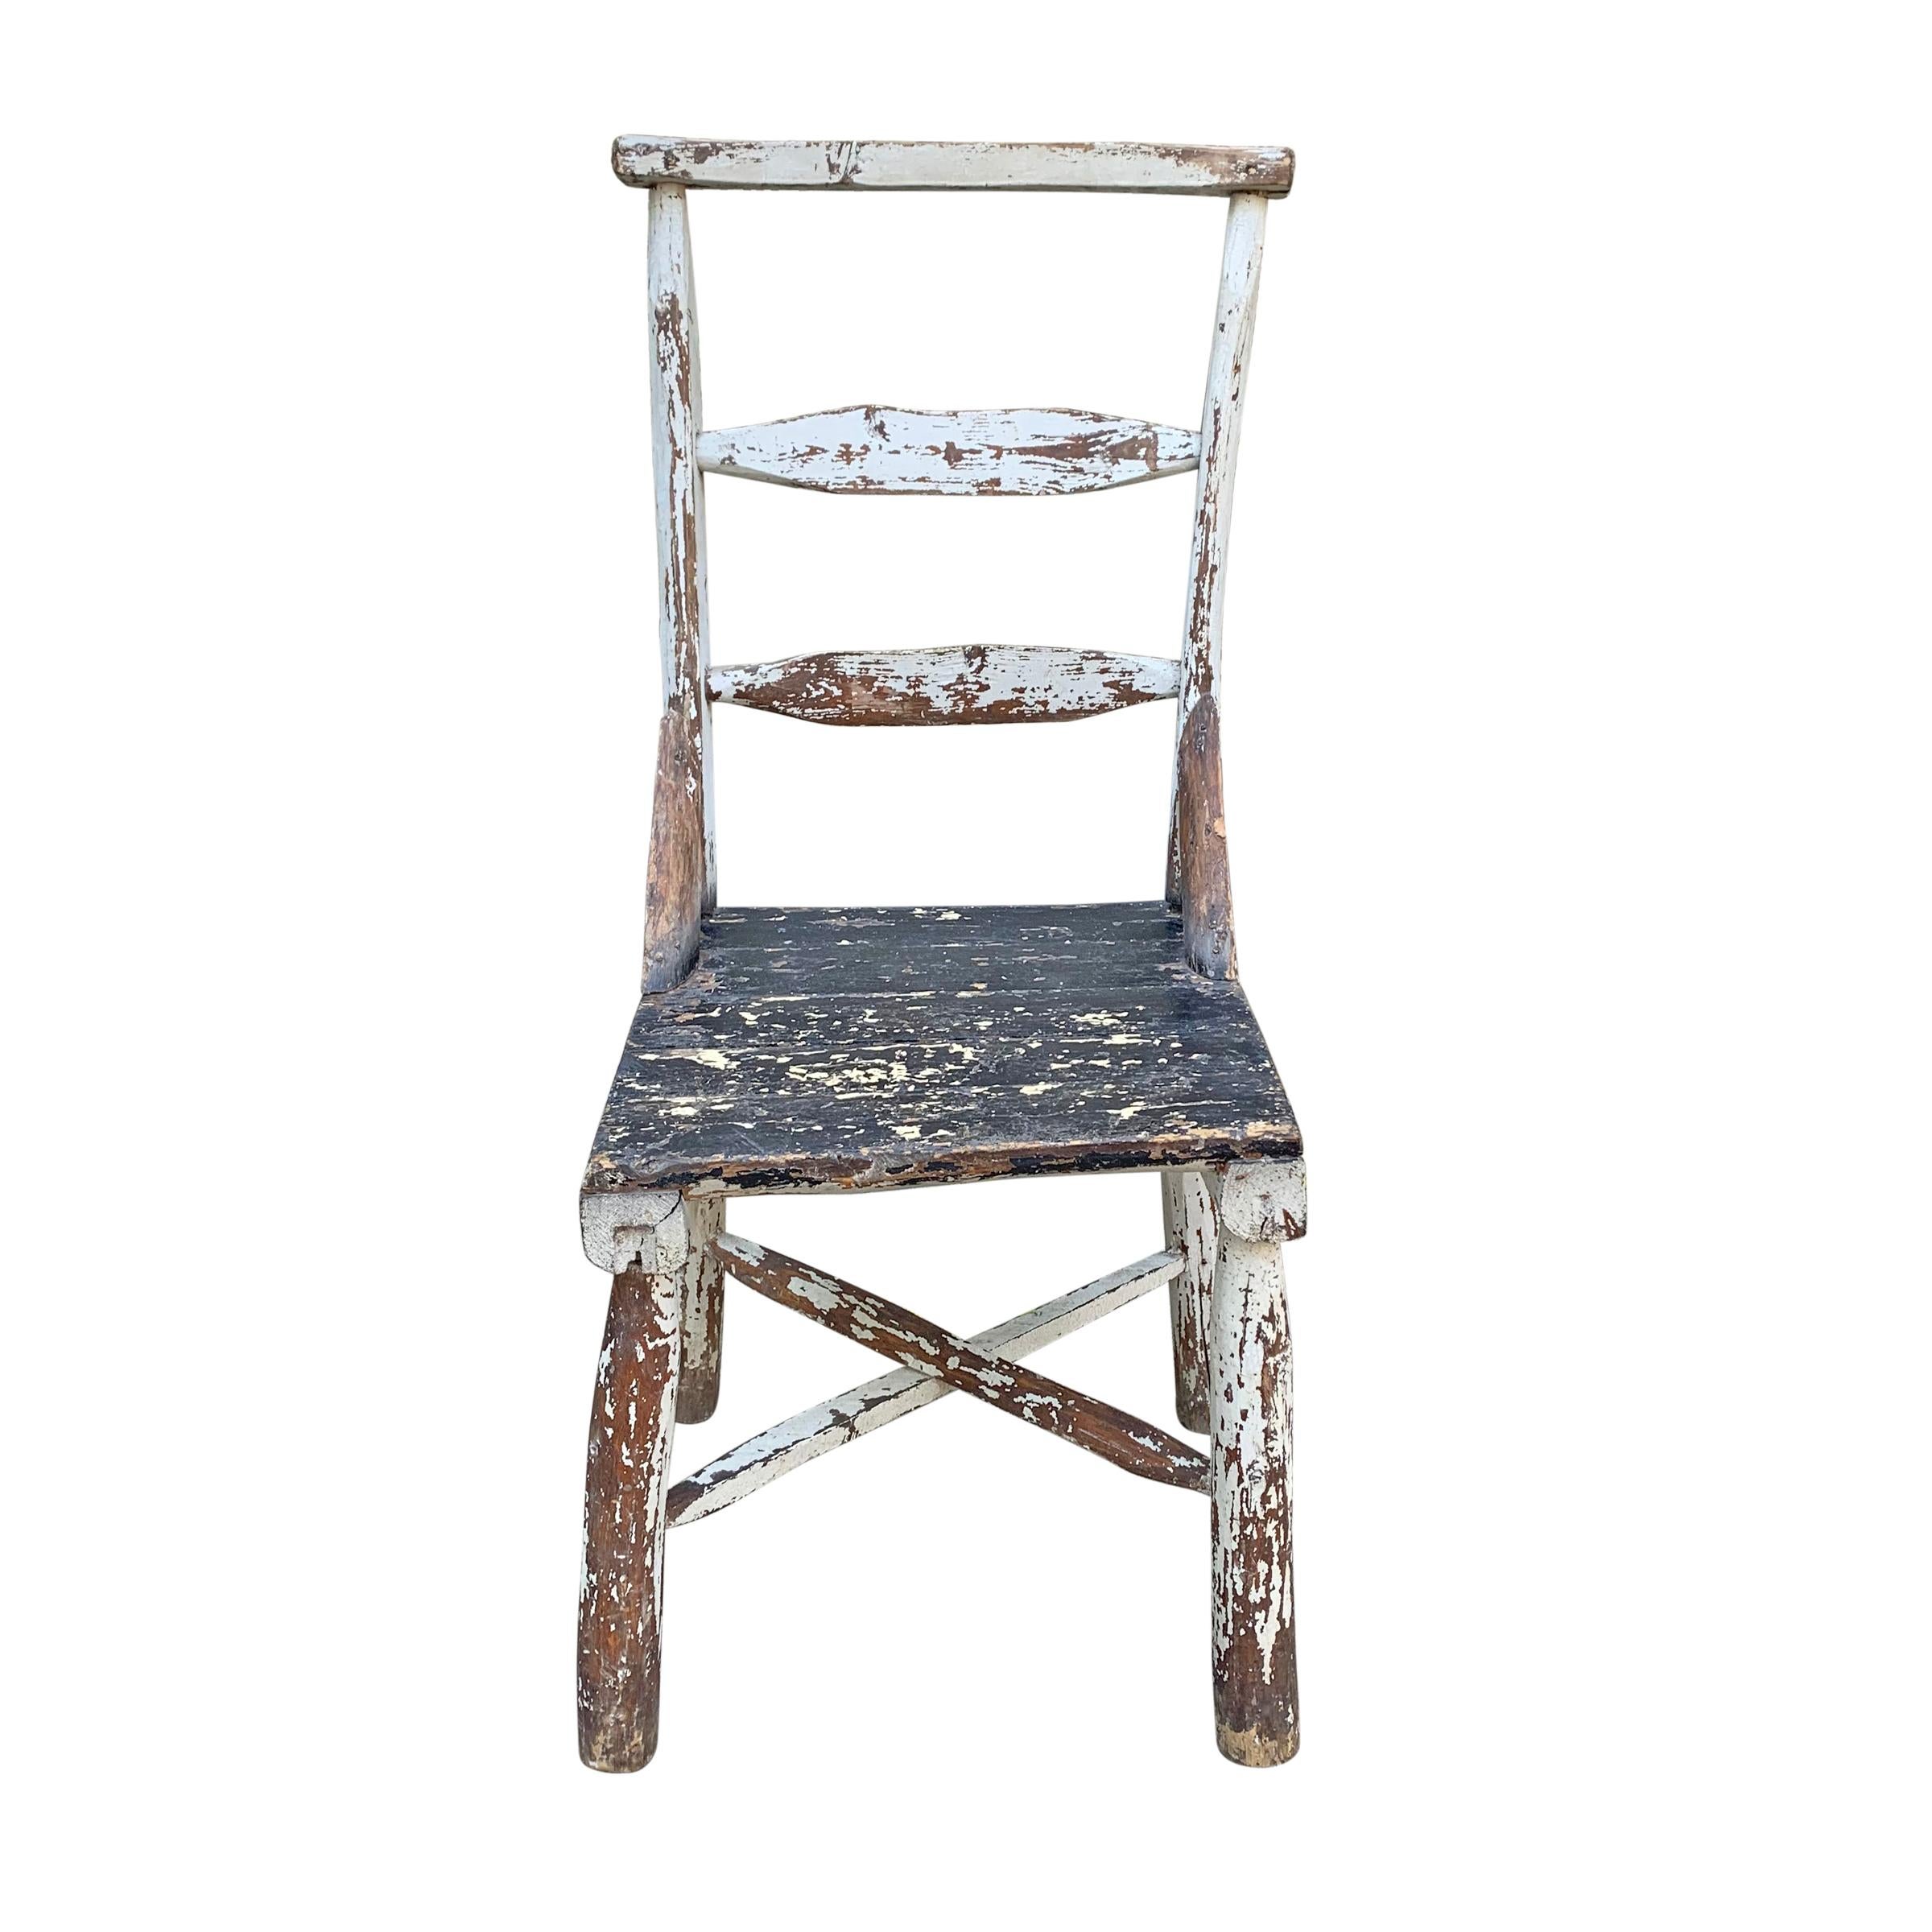 A beautiful early 20th century American Adirondack ladder-back chair of wonderful sculptural and primitive form with white and black chippy paint.